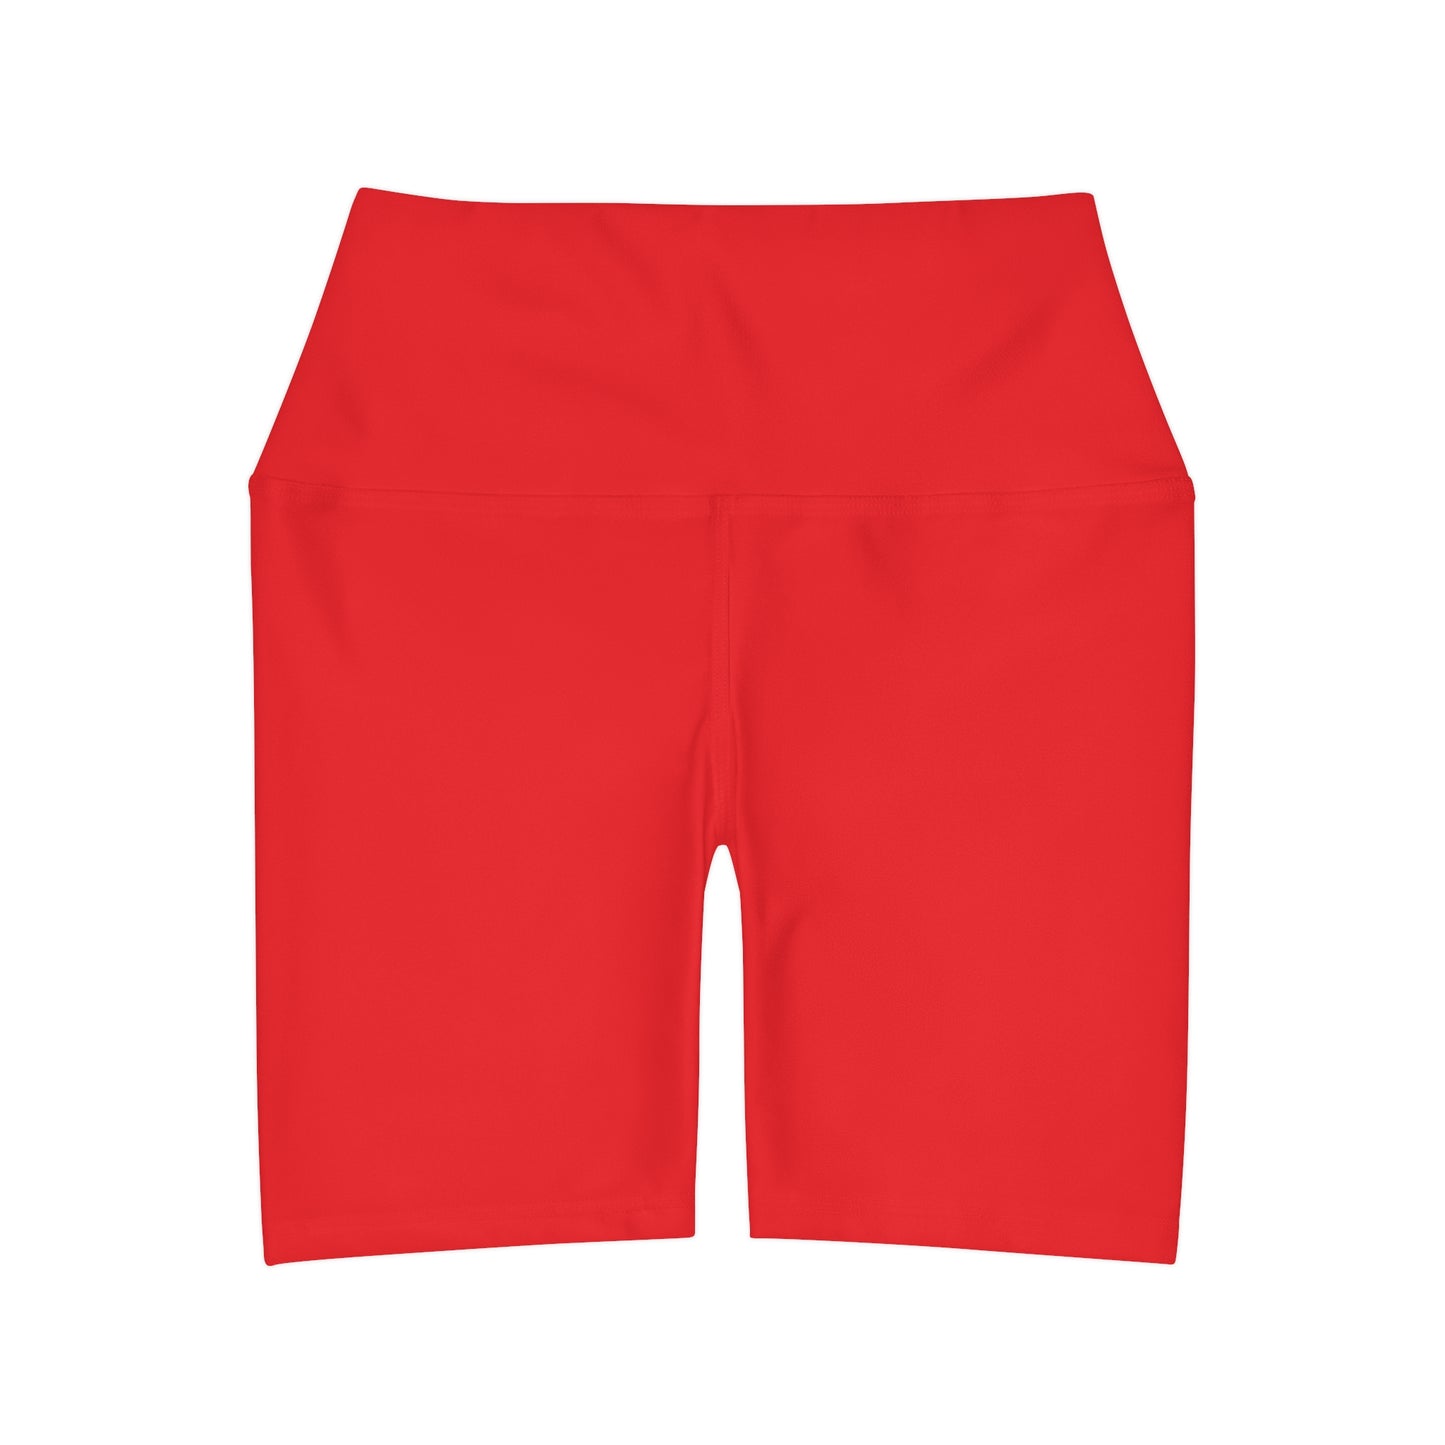 Bright Red BTS High Waisted Yoga Shorts